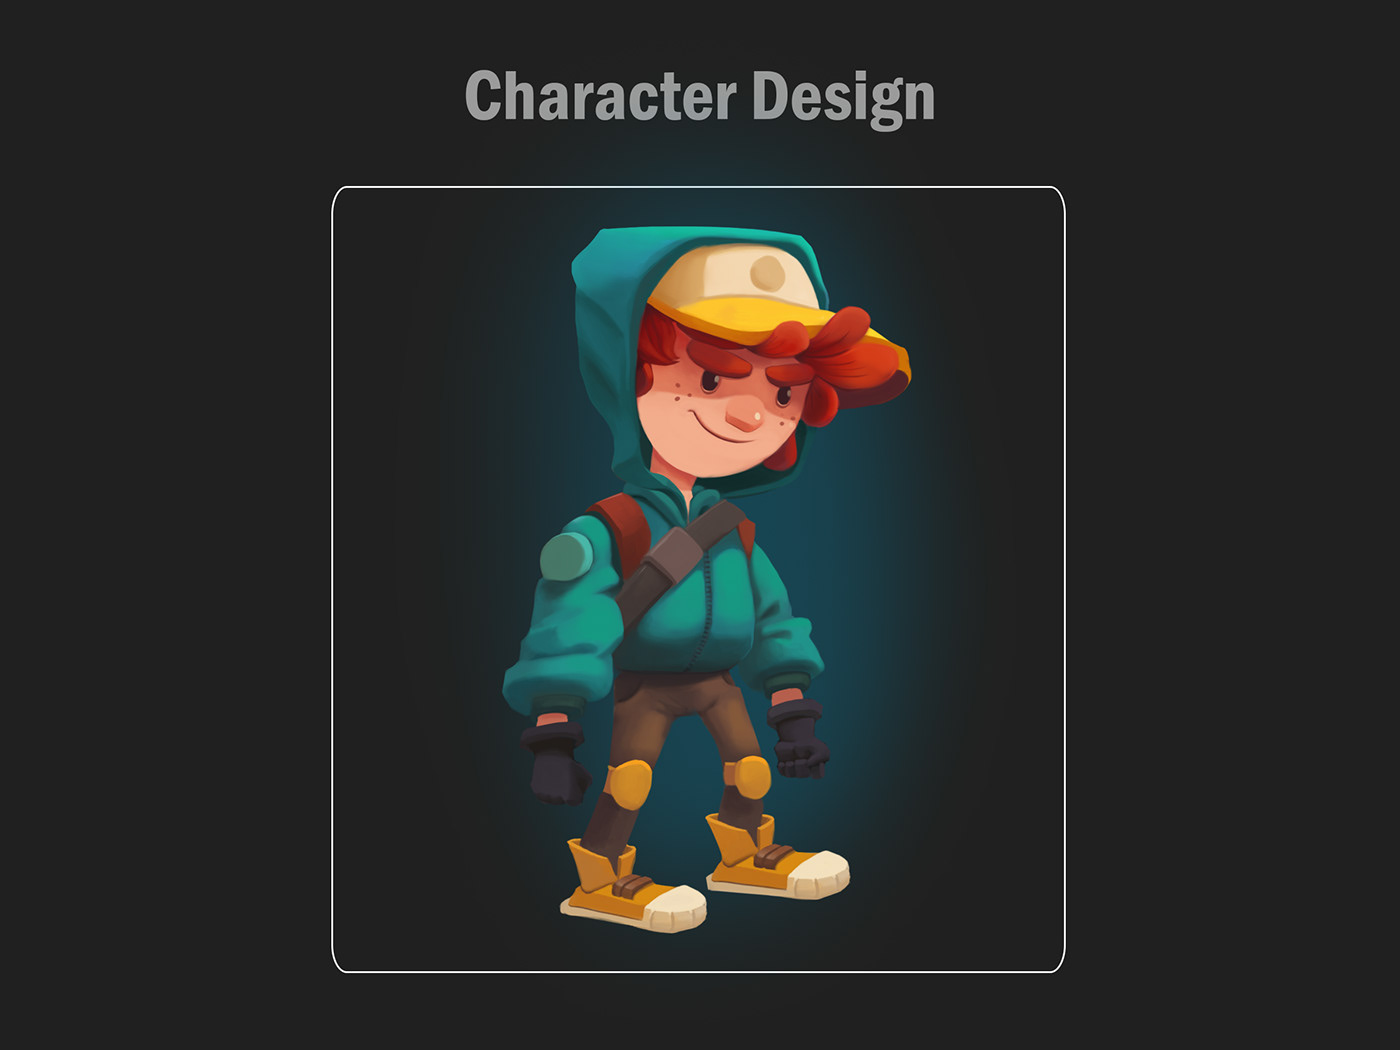 Character design parkour Urban Game Art side scroller concept art 3D Assets character animation Run Cycle